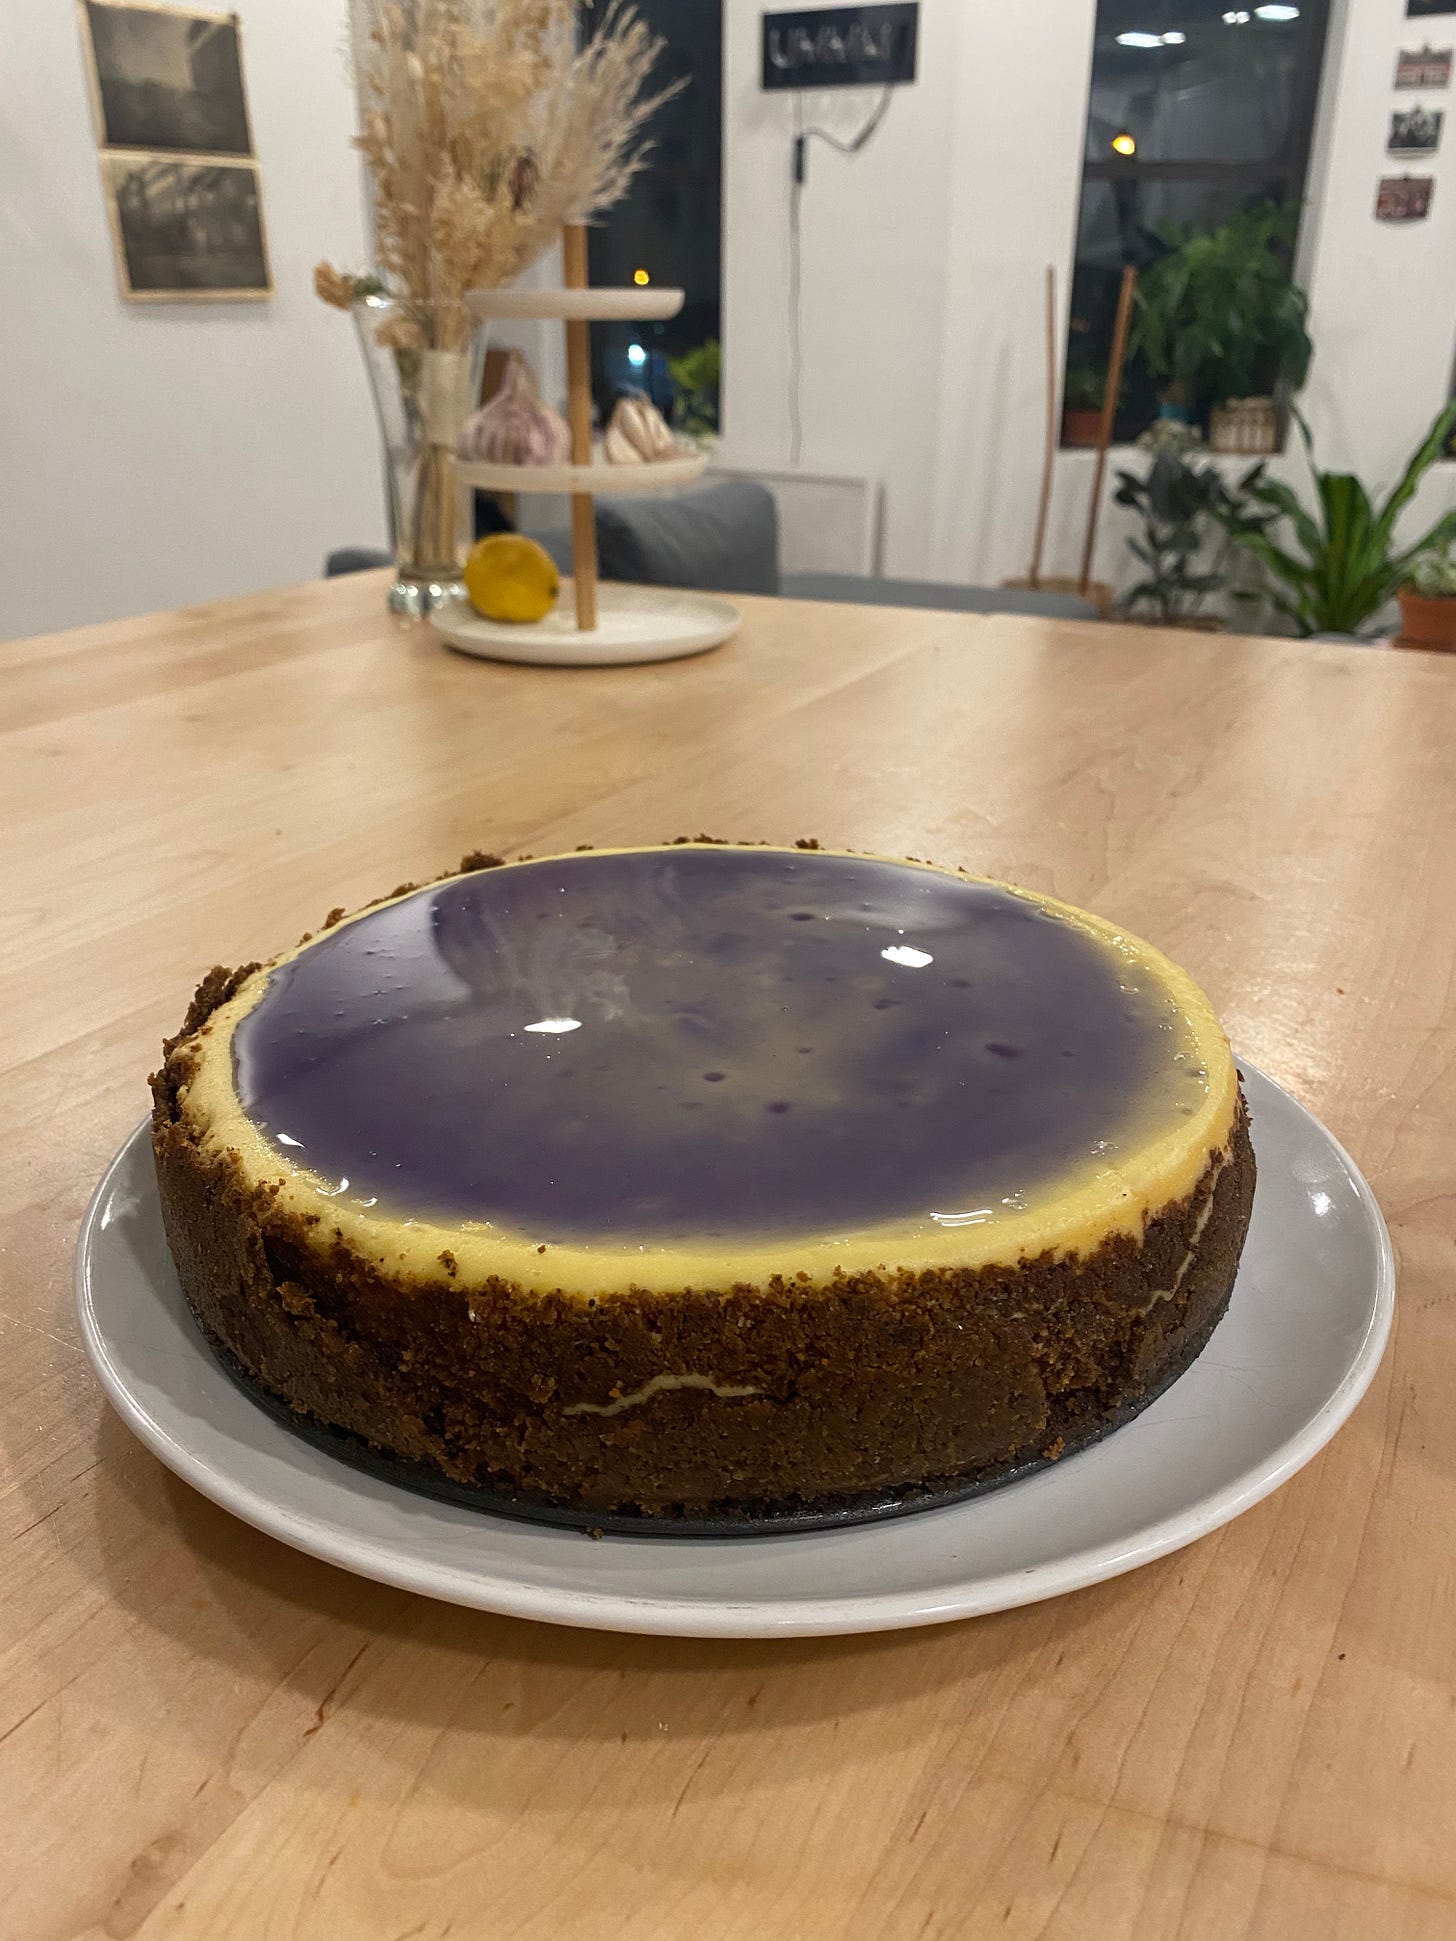 A cream cheesecake with a blue glossy syrup and brown crust sits on a white plate and wood kitchen island.